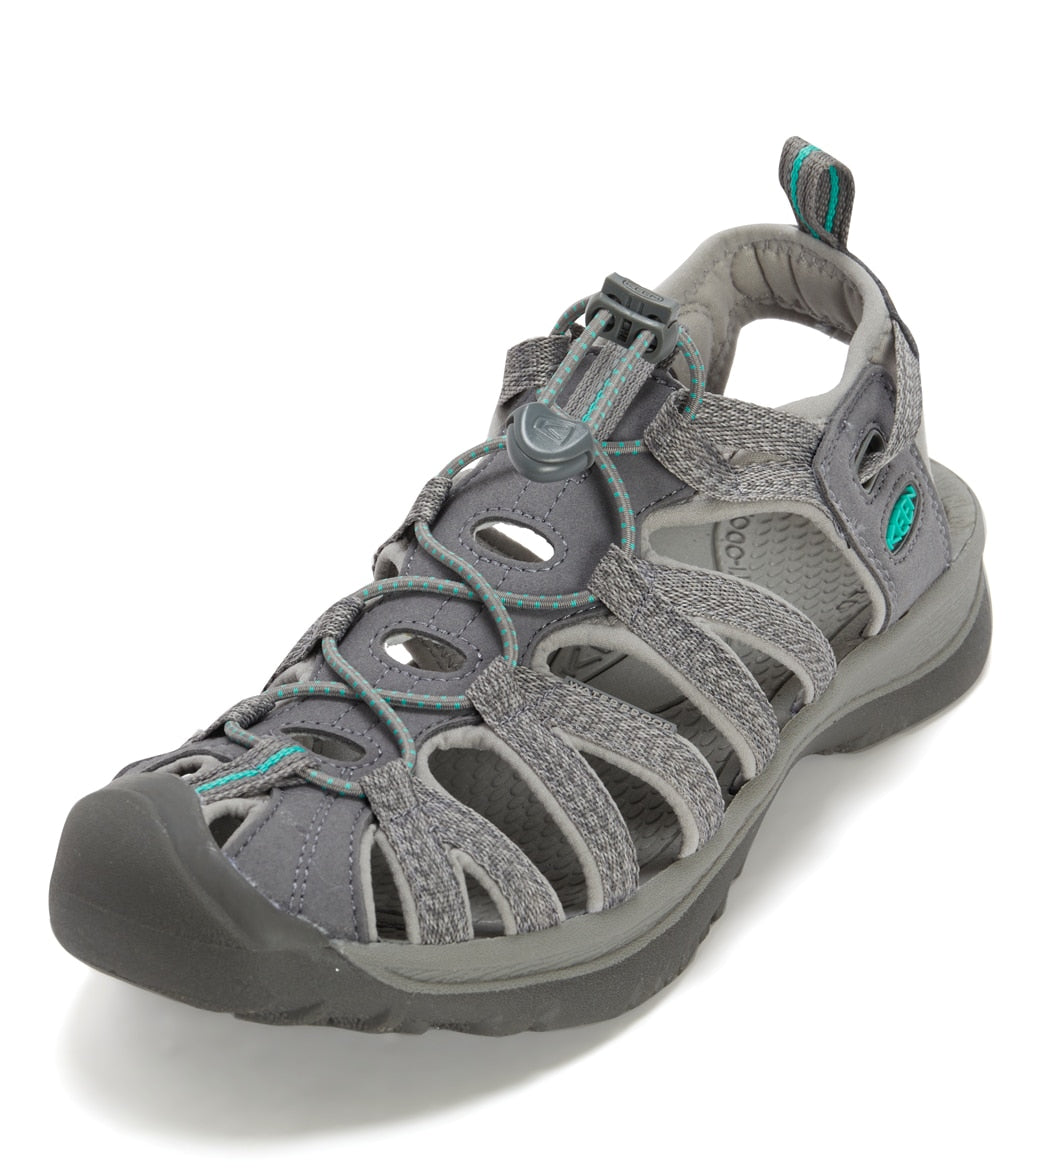 Keen Women's Whisper Water Shoes at SwimOutlet.com